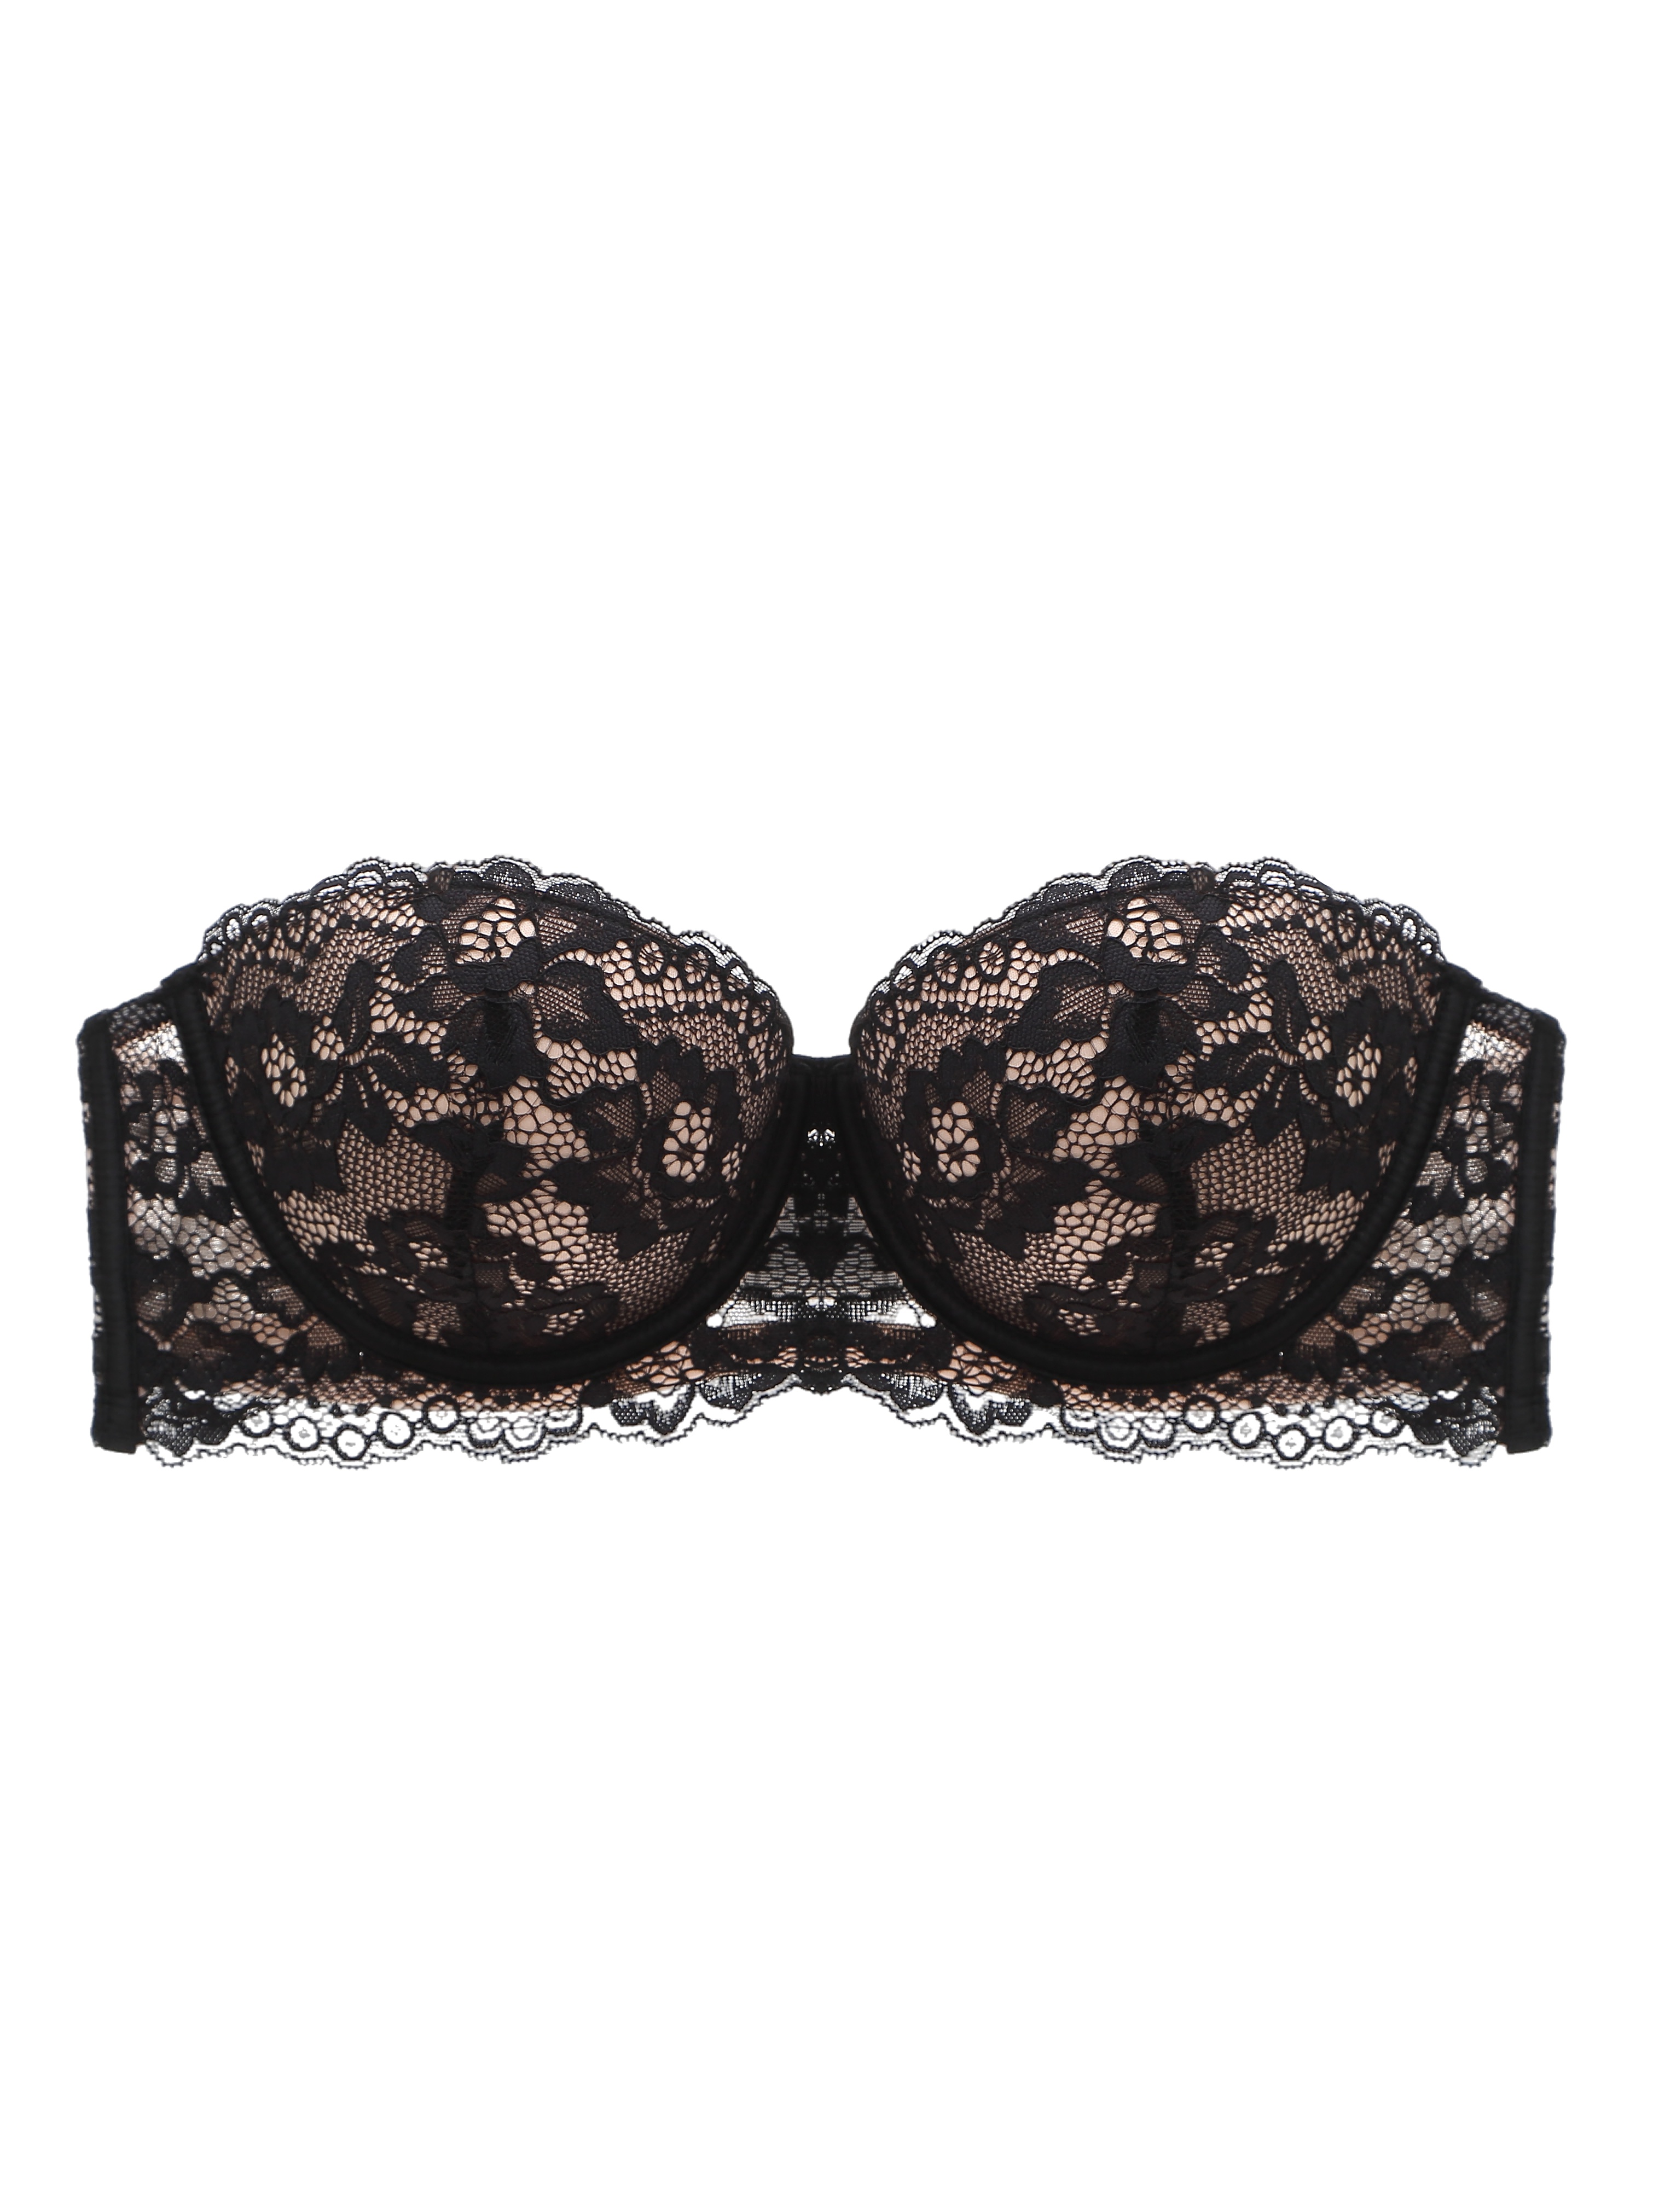 Floral Lace Push-Up Lightly Padded Demi Plunge Underwire Bra Black